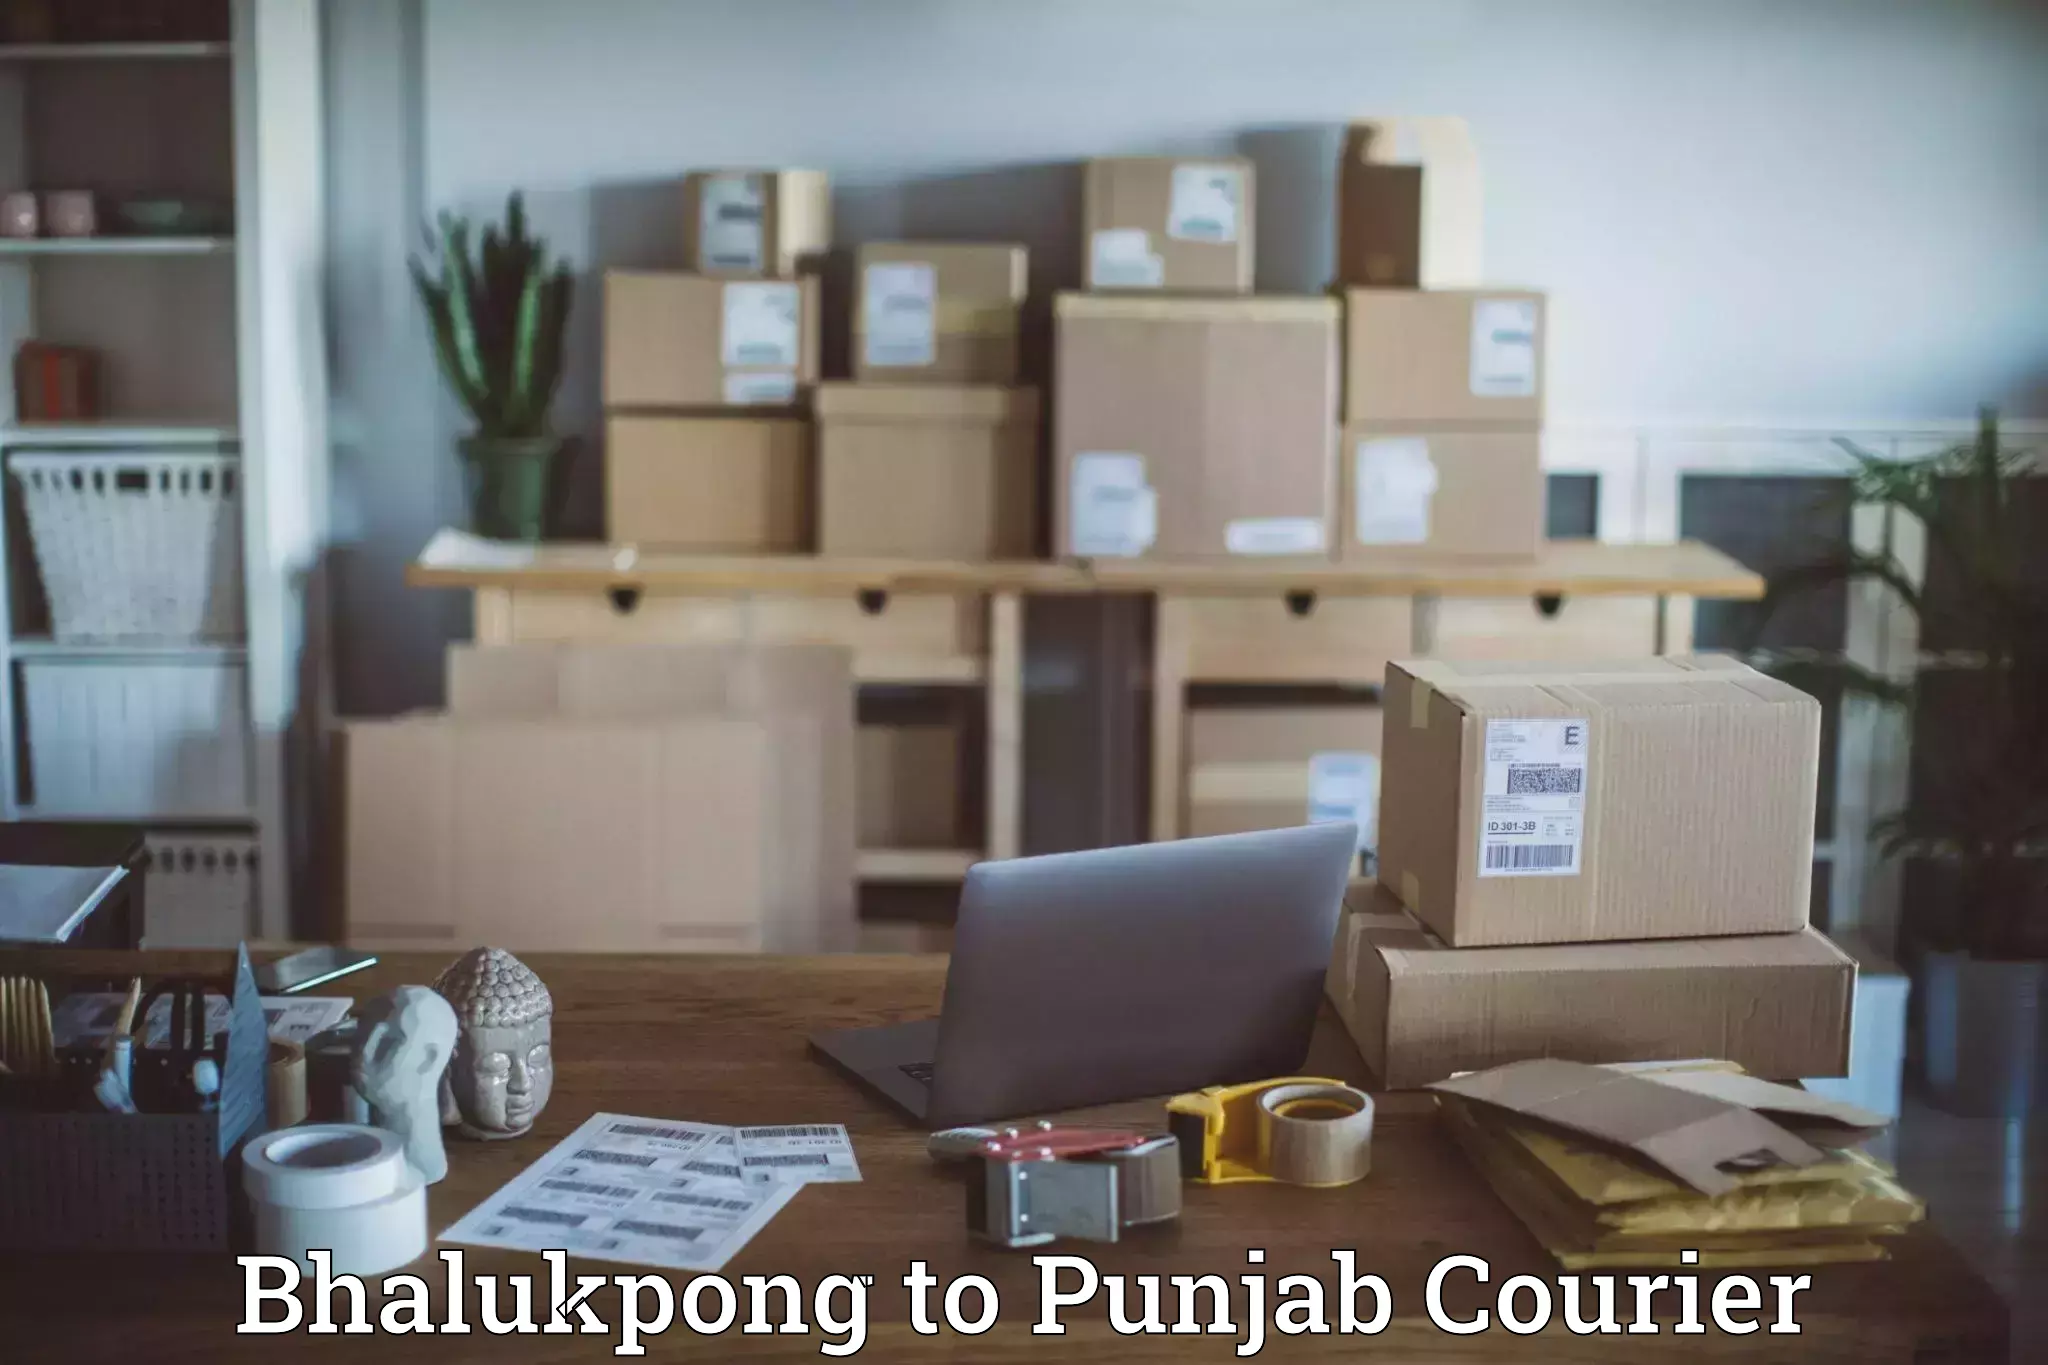 Seamless shipping experience in Bhalukpong to Jalandhar